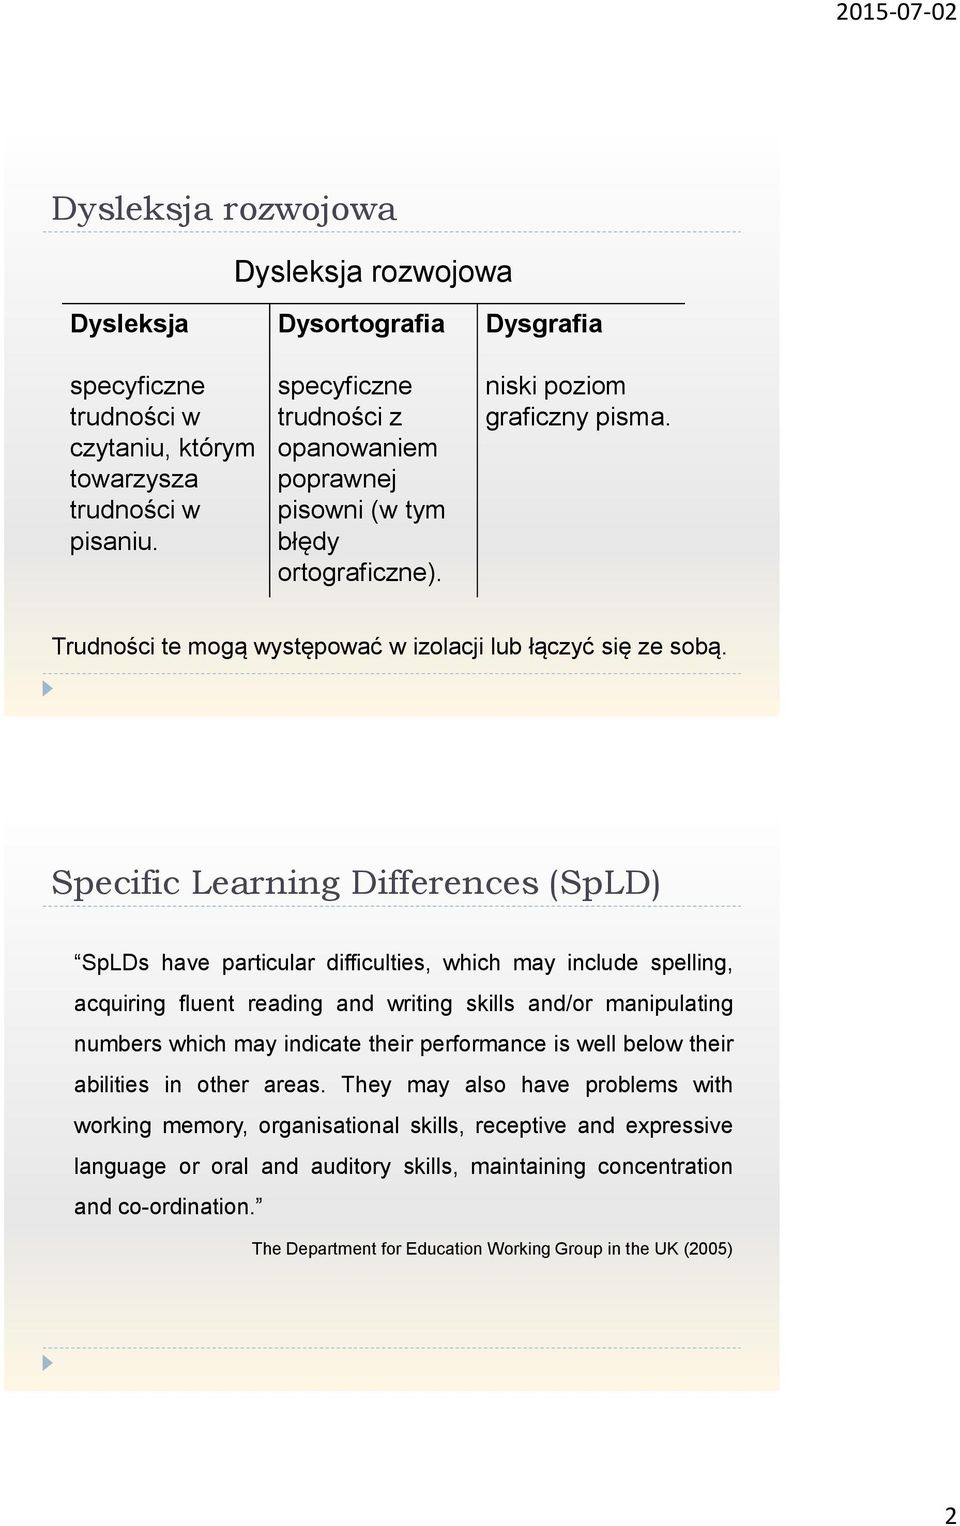 Specific Learning Differences (SpLD) SpLDs have particular difficulties, which may include spelling, acquiring fluent reading and writing skills and/or manipulating numbers which may indicate their